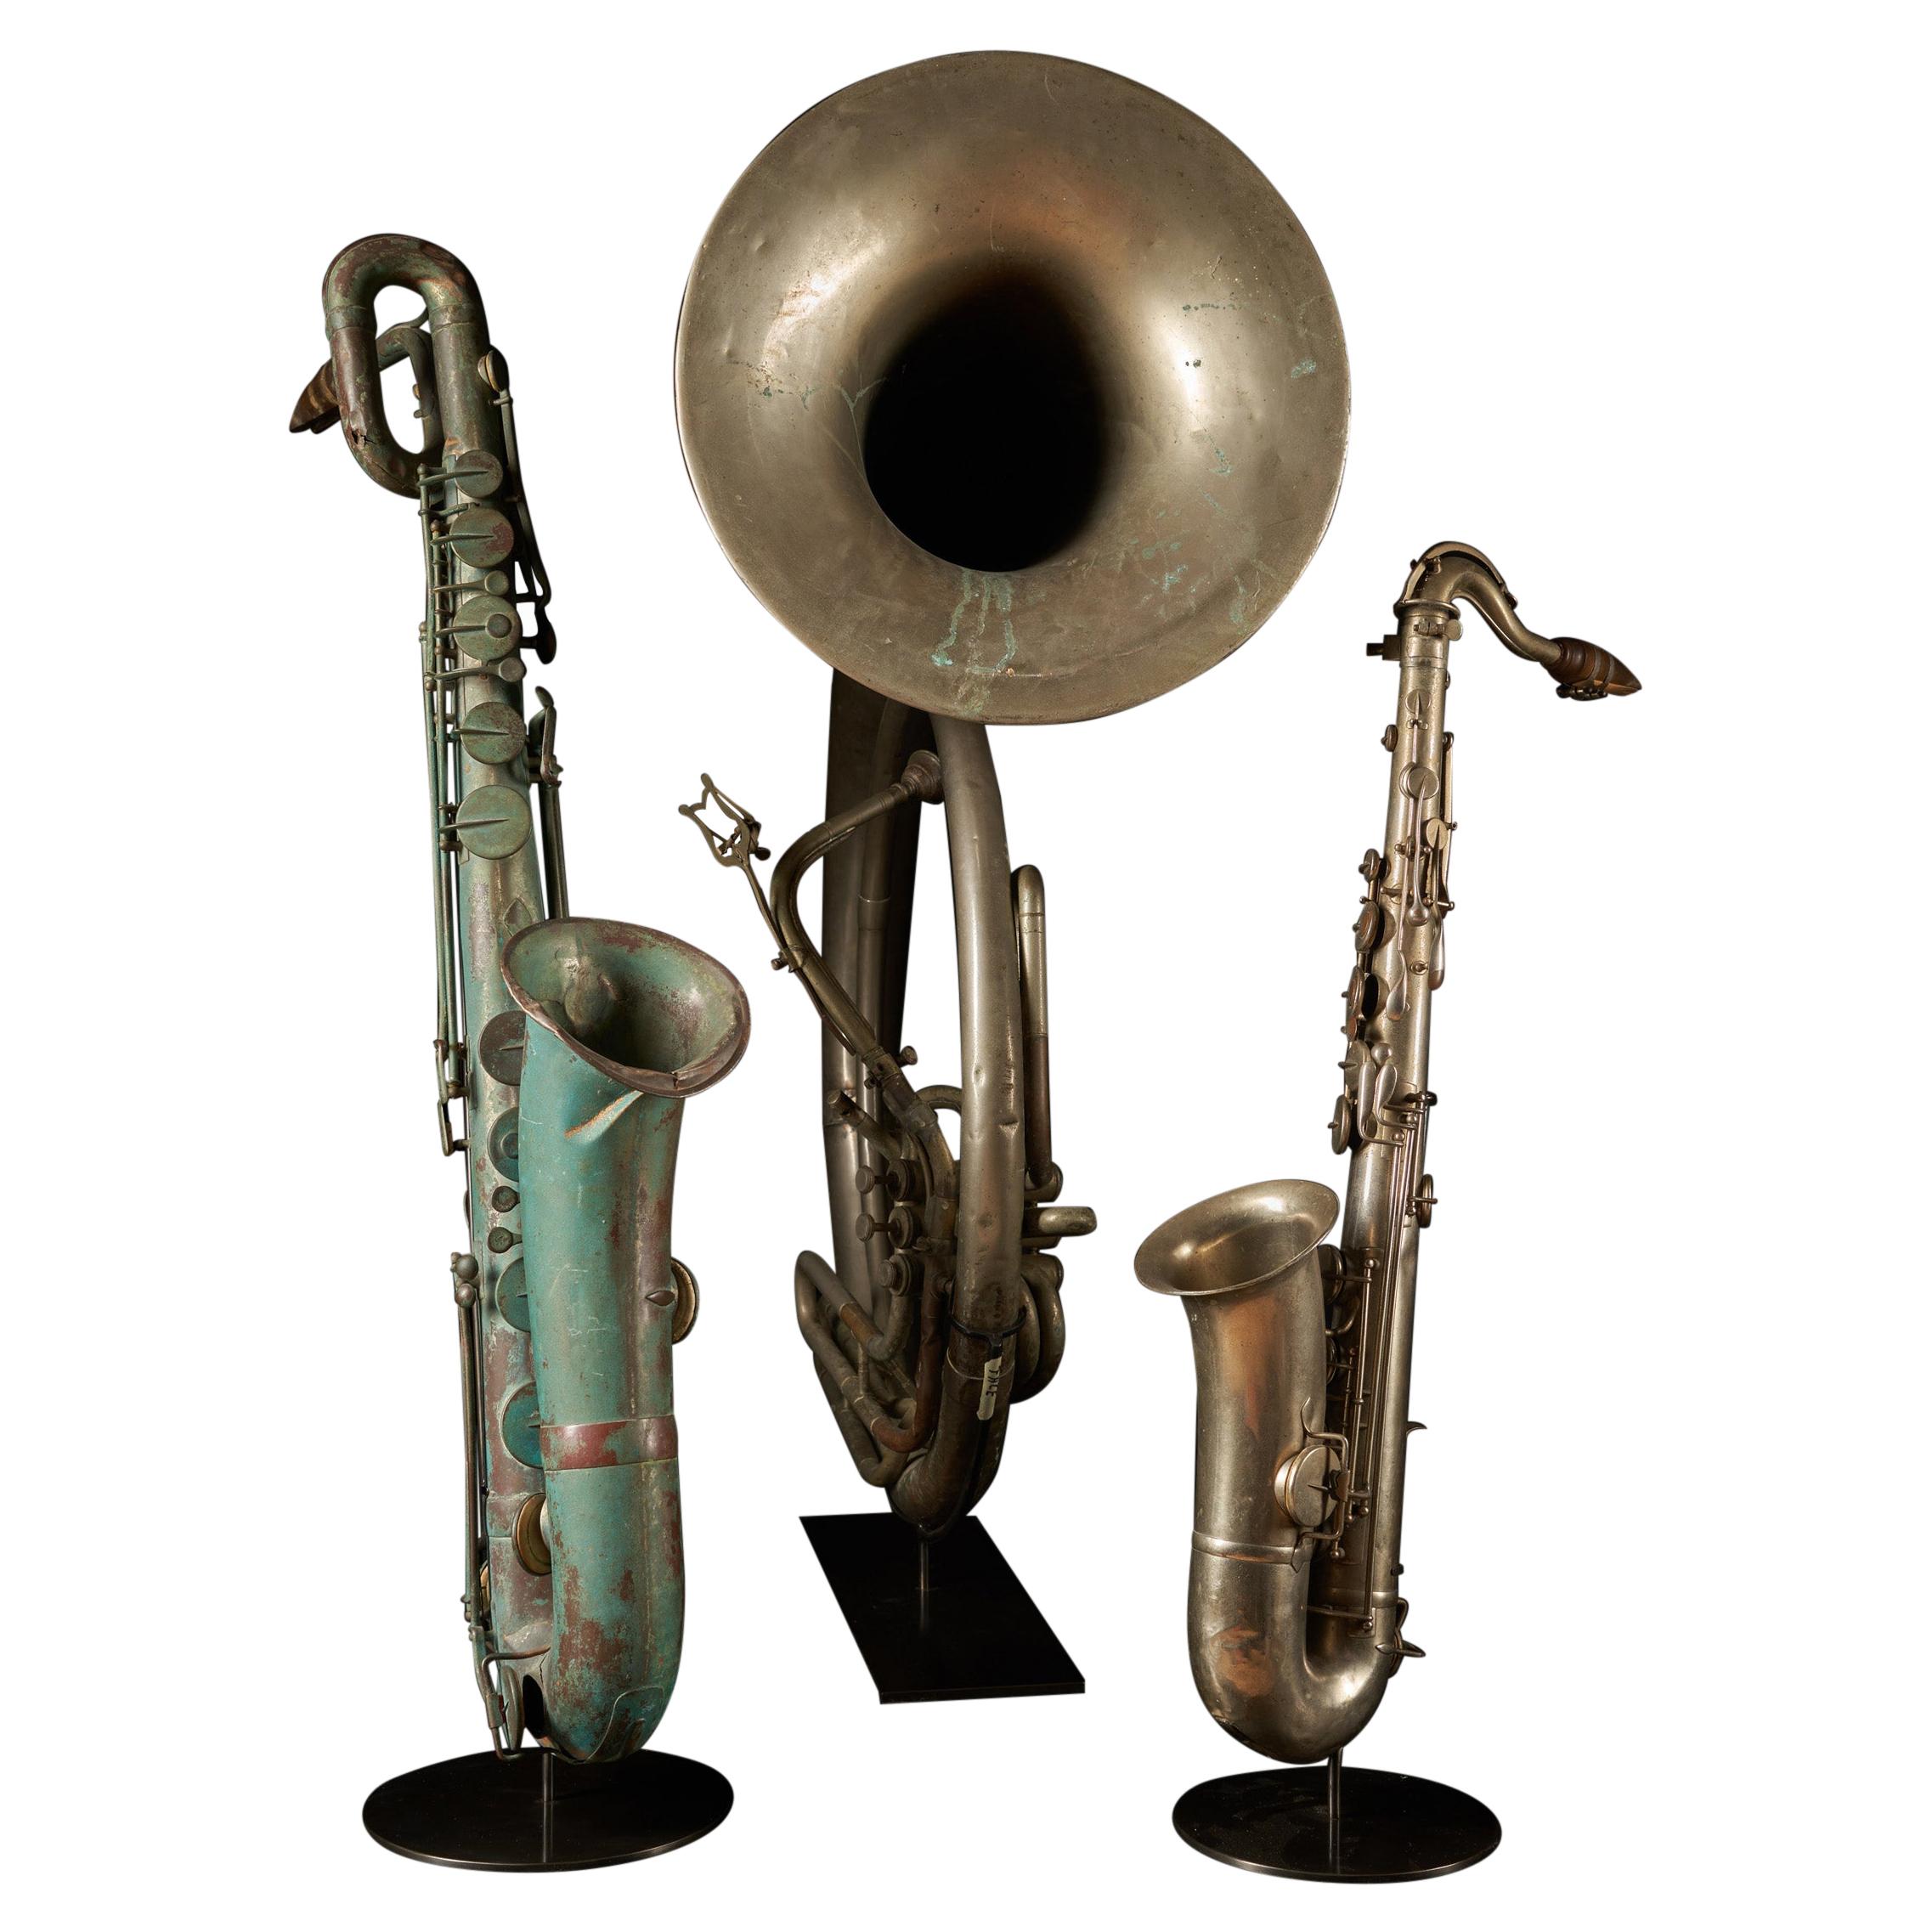 Early 20th C. Bombardon and Two Saxophones by F. Cauwelaert